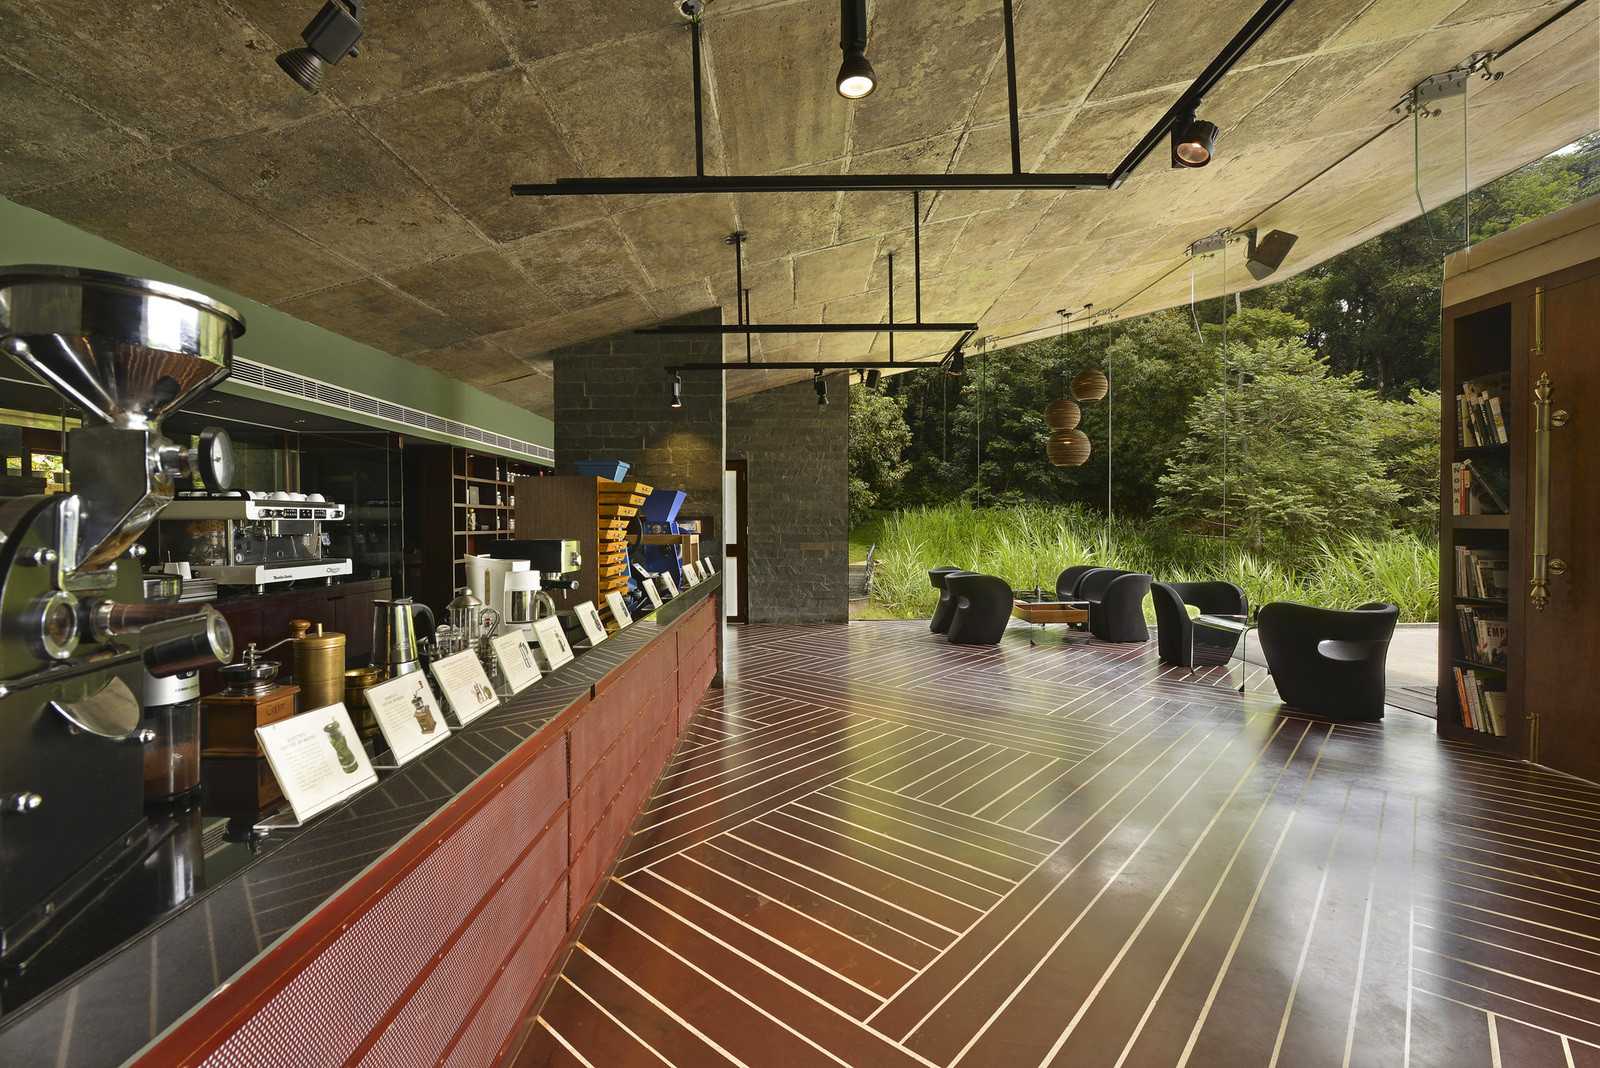 A coffee shop at the Ibnii Hotel in India